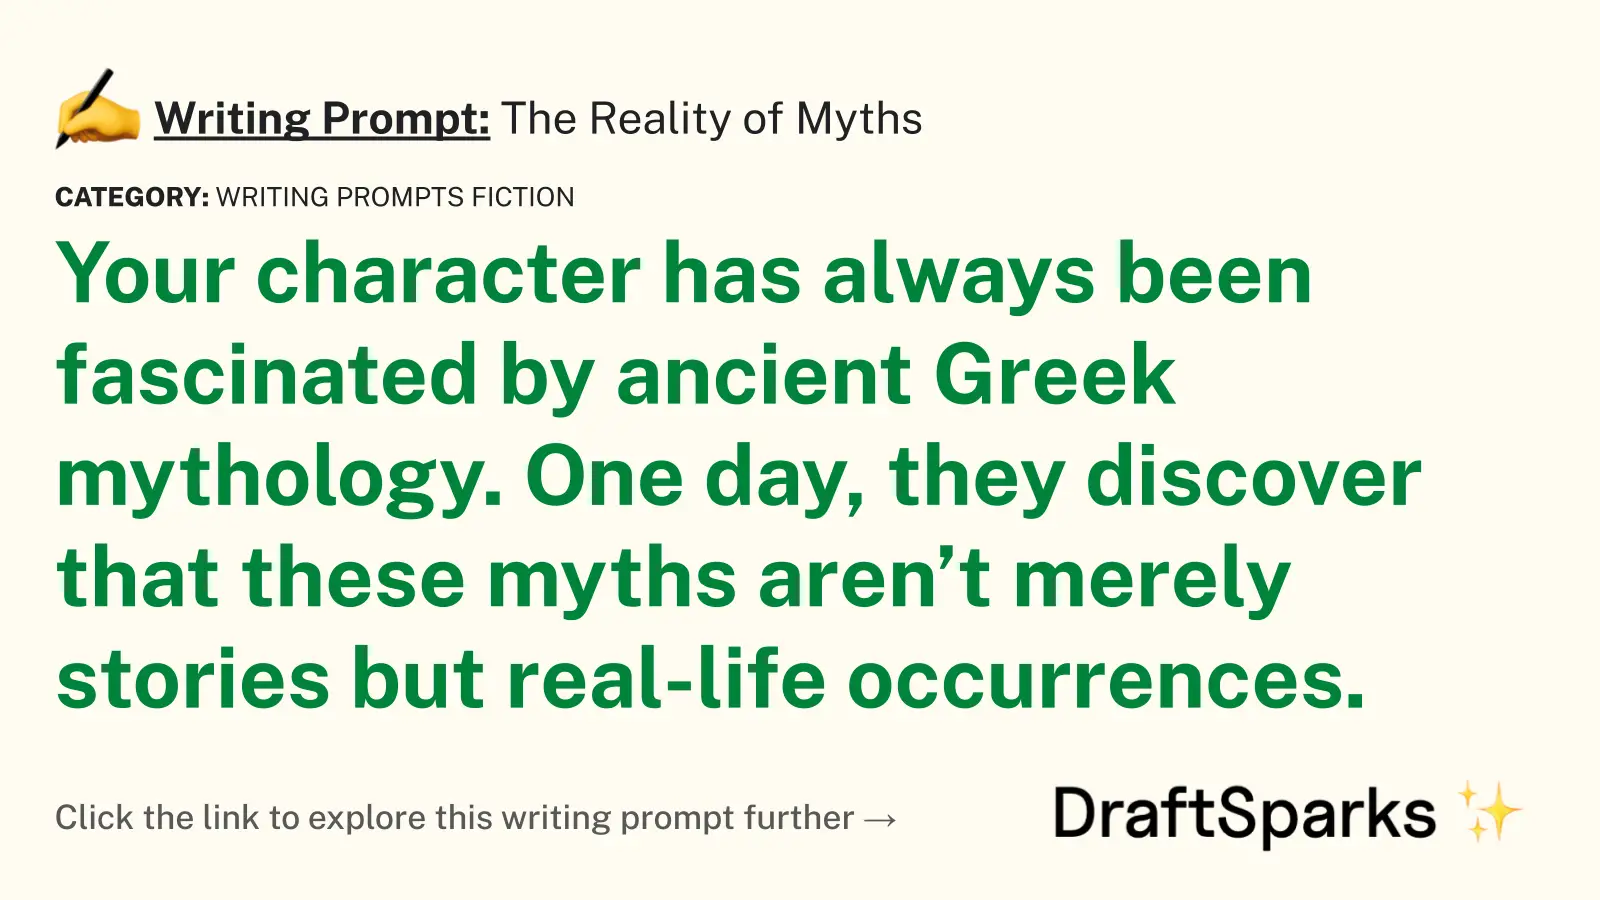 The Reality of Myths